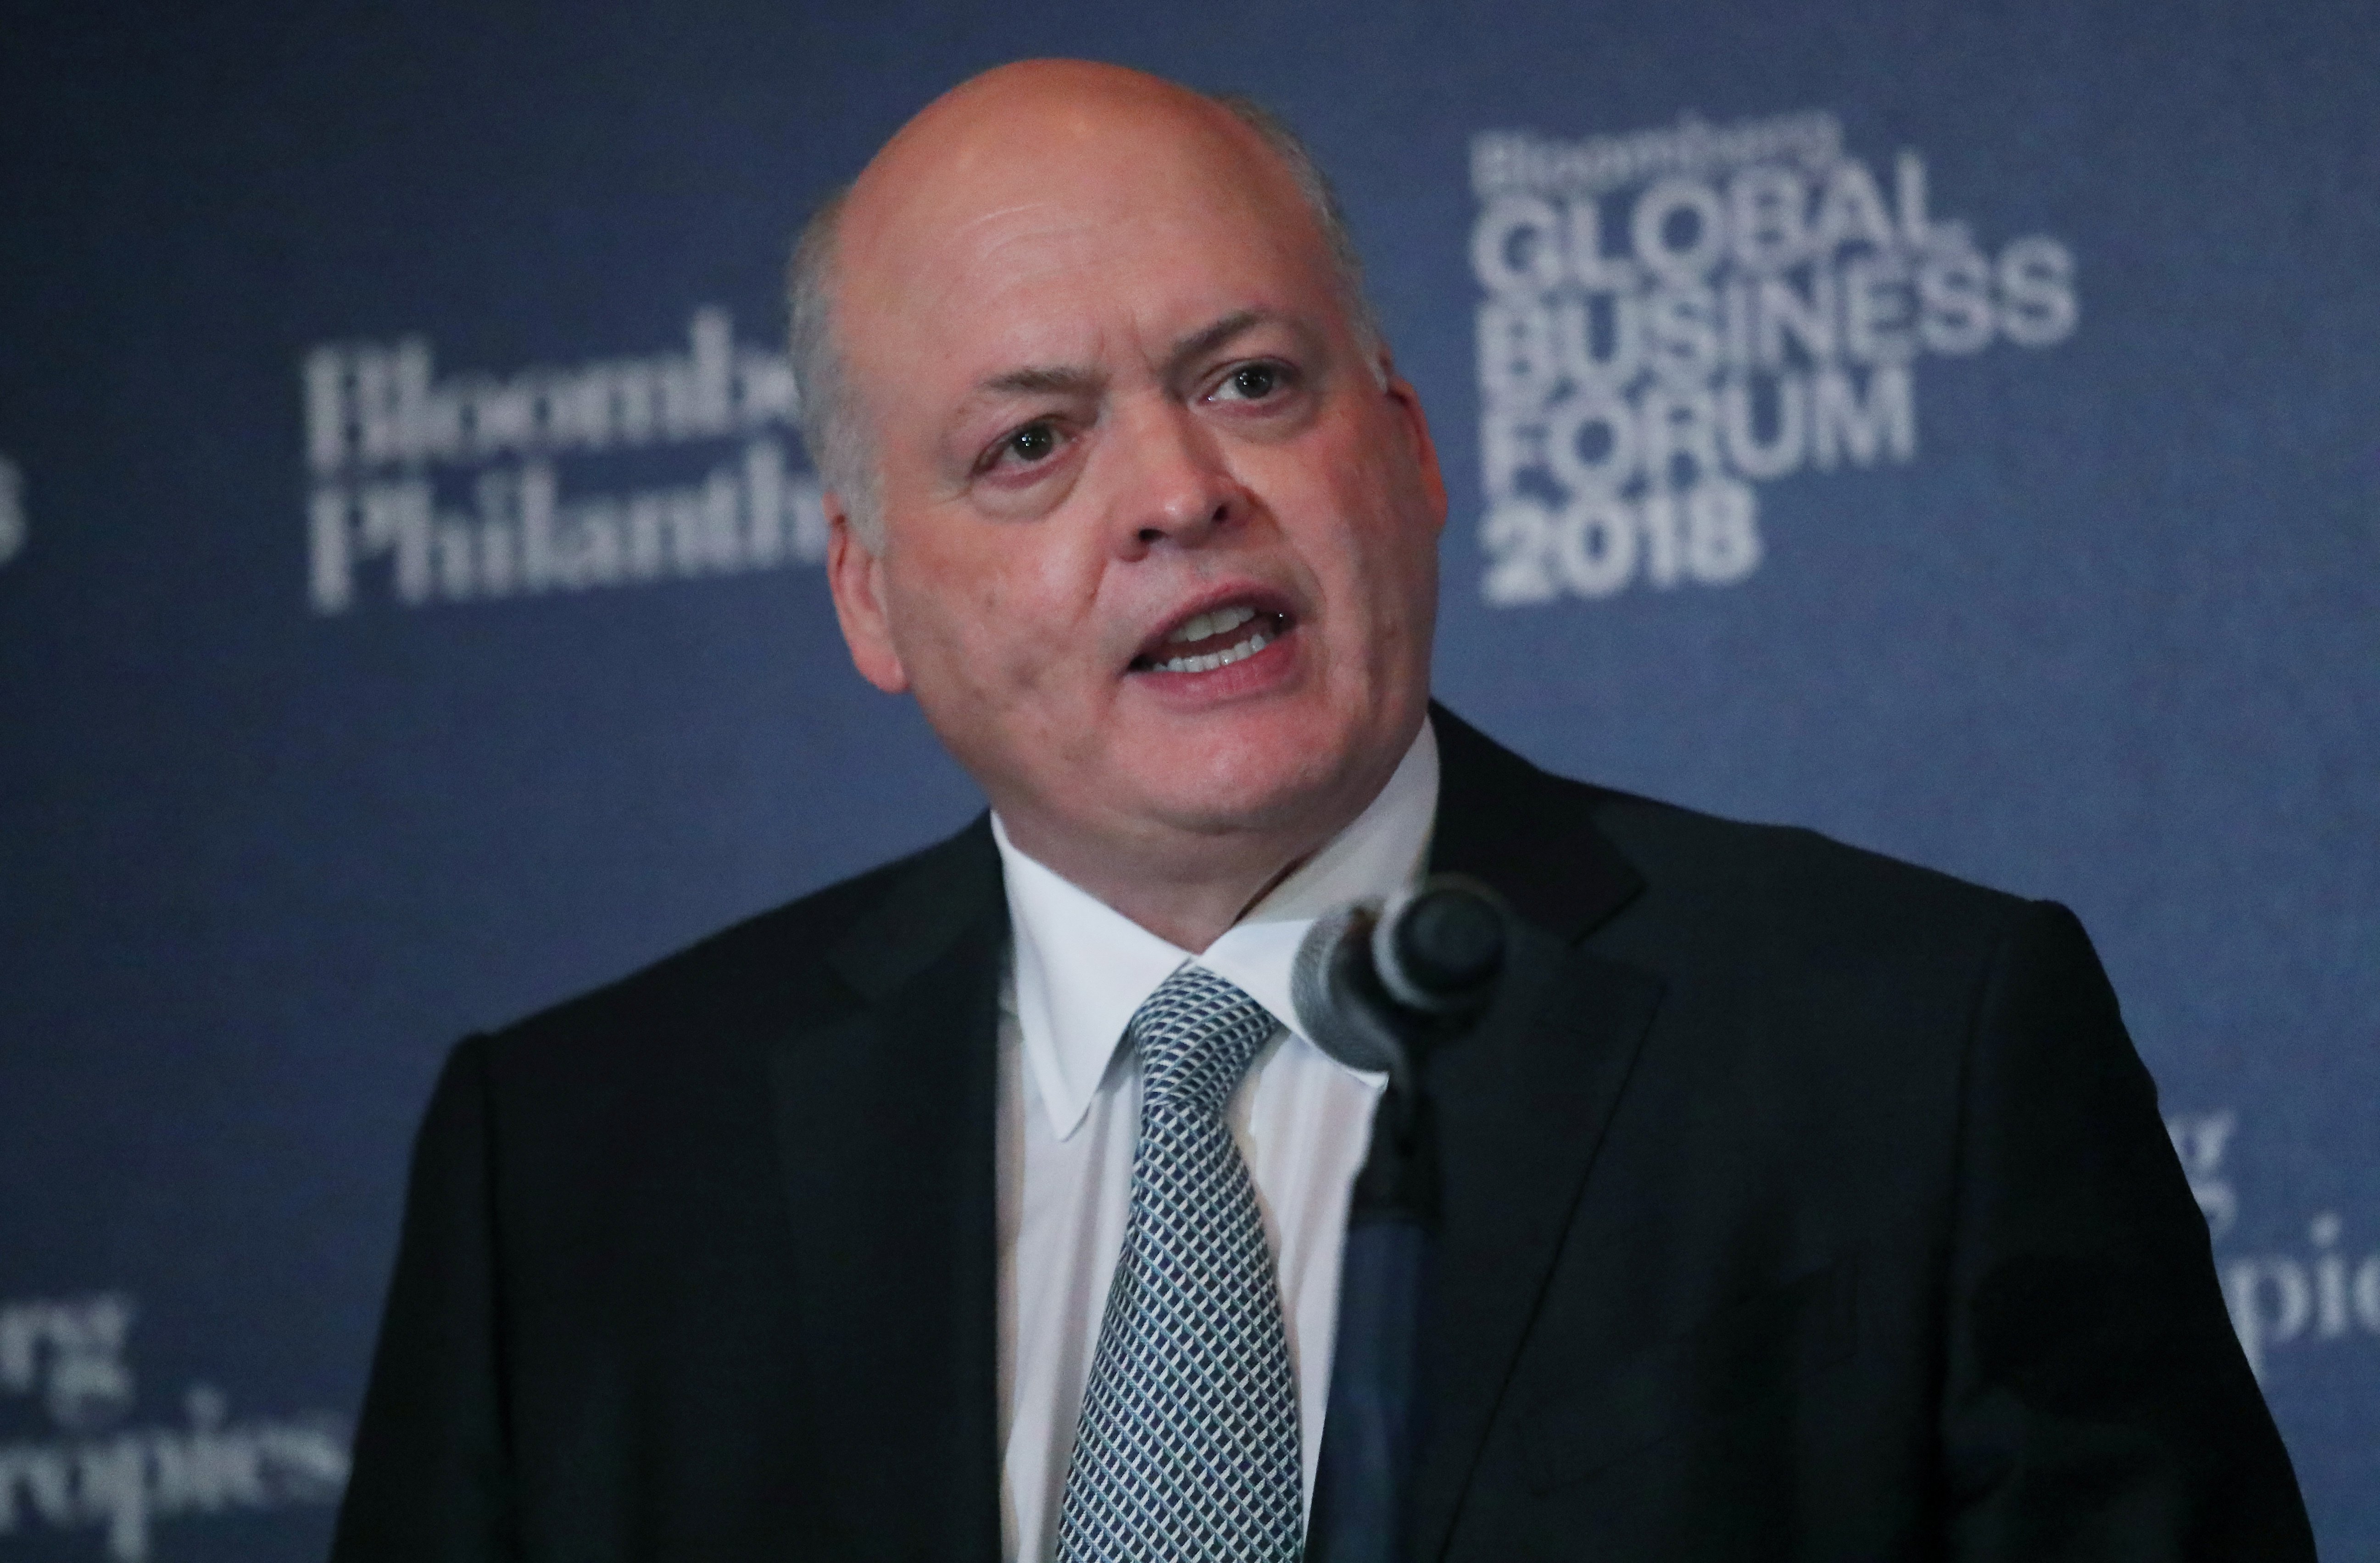 Jim Hackett, president and chief executive officer of Ford, speaks at the Bloomberg Global Business forum in New York, U.S., September 26, 2018. REUTERS/Shannon Stapleton